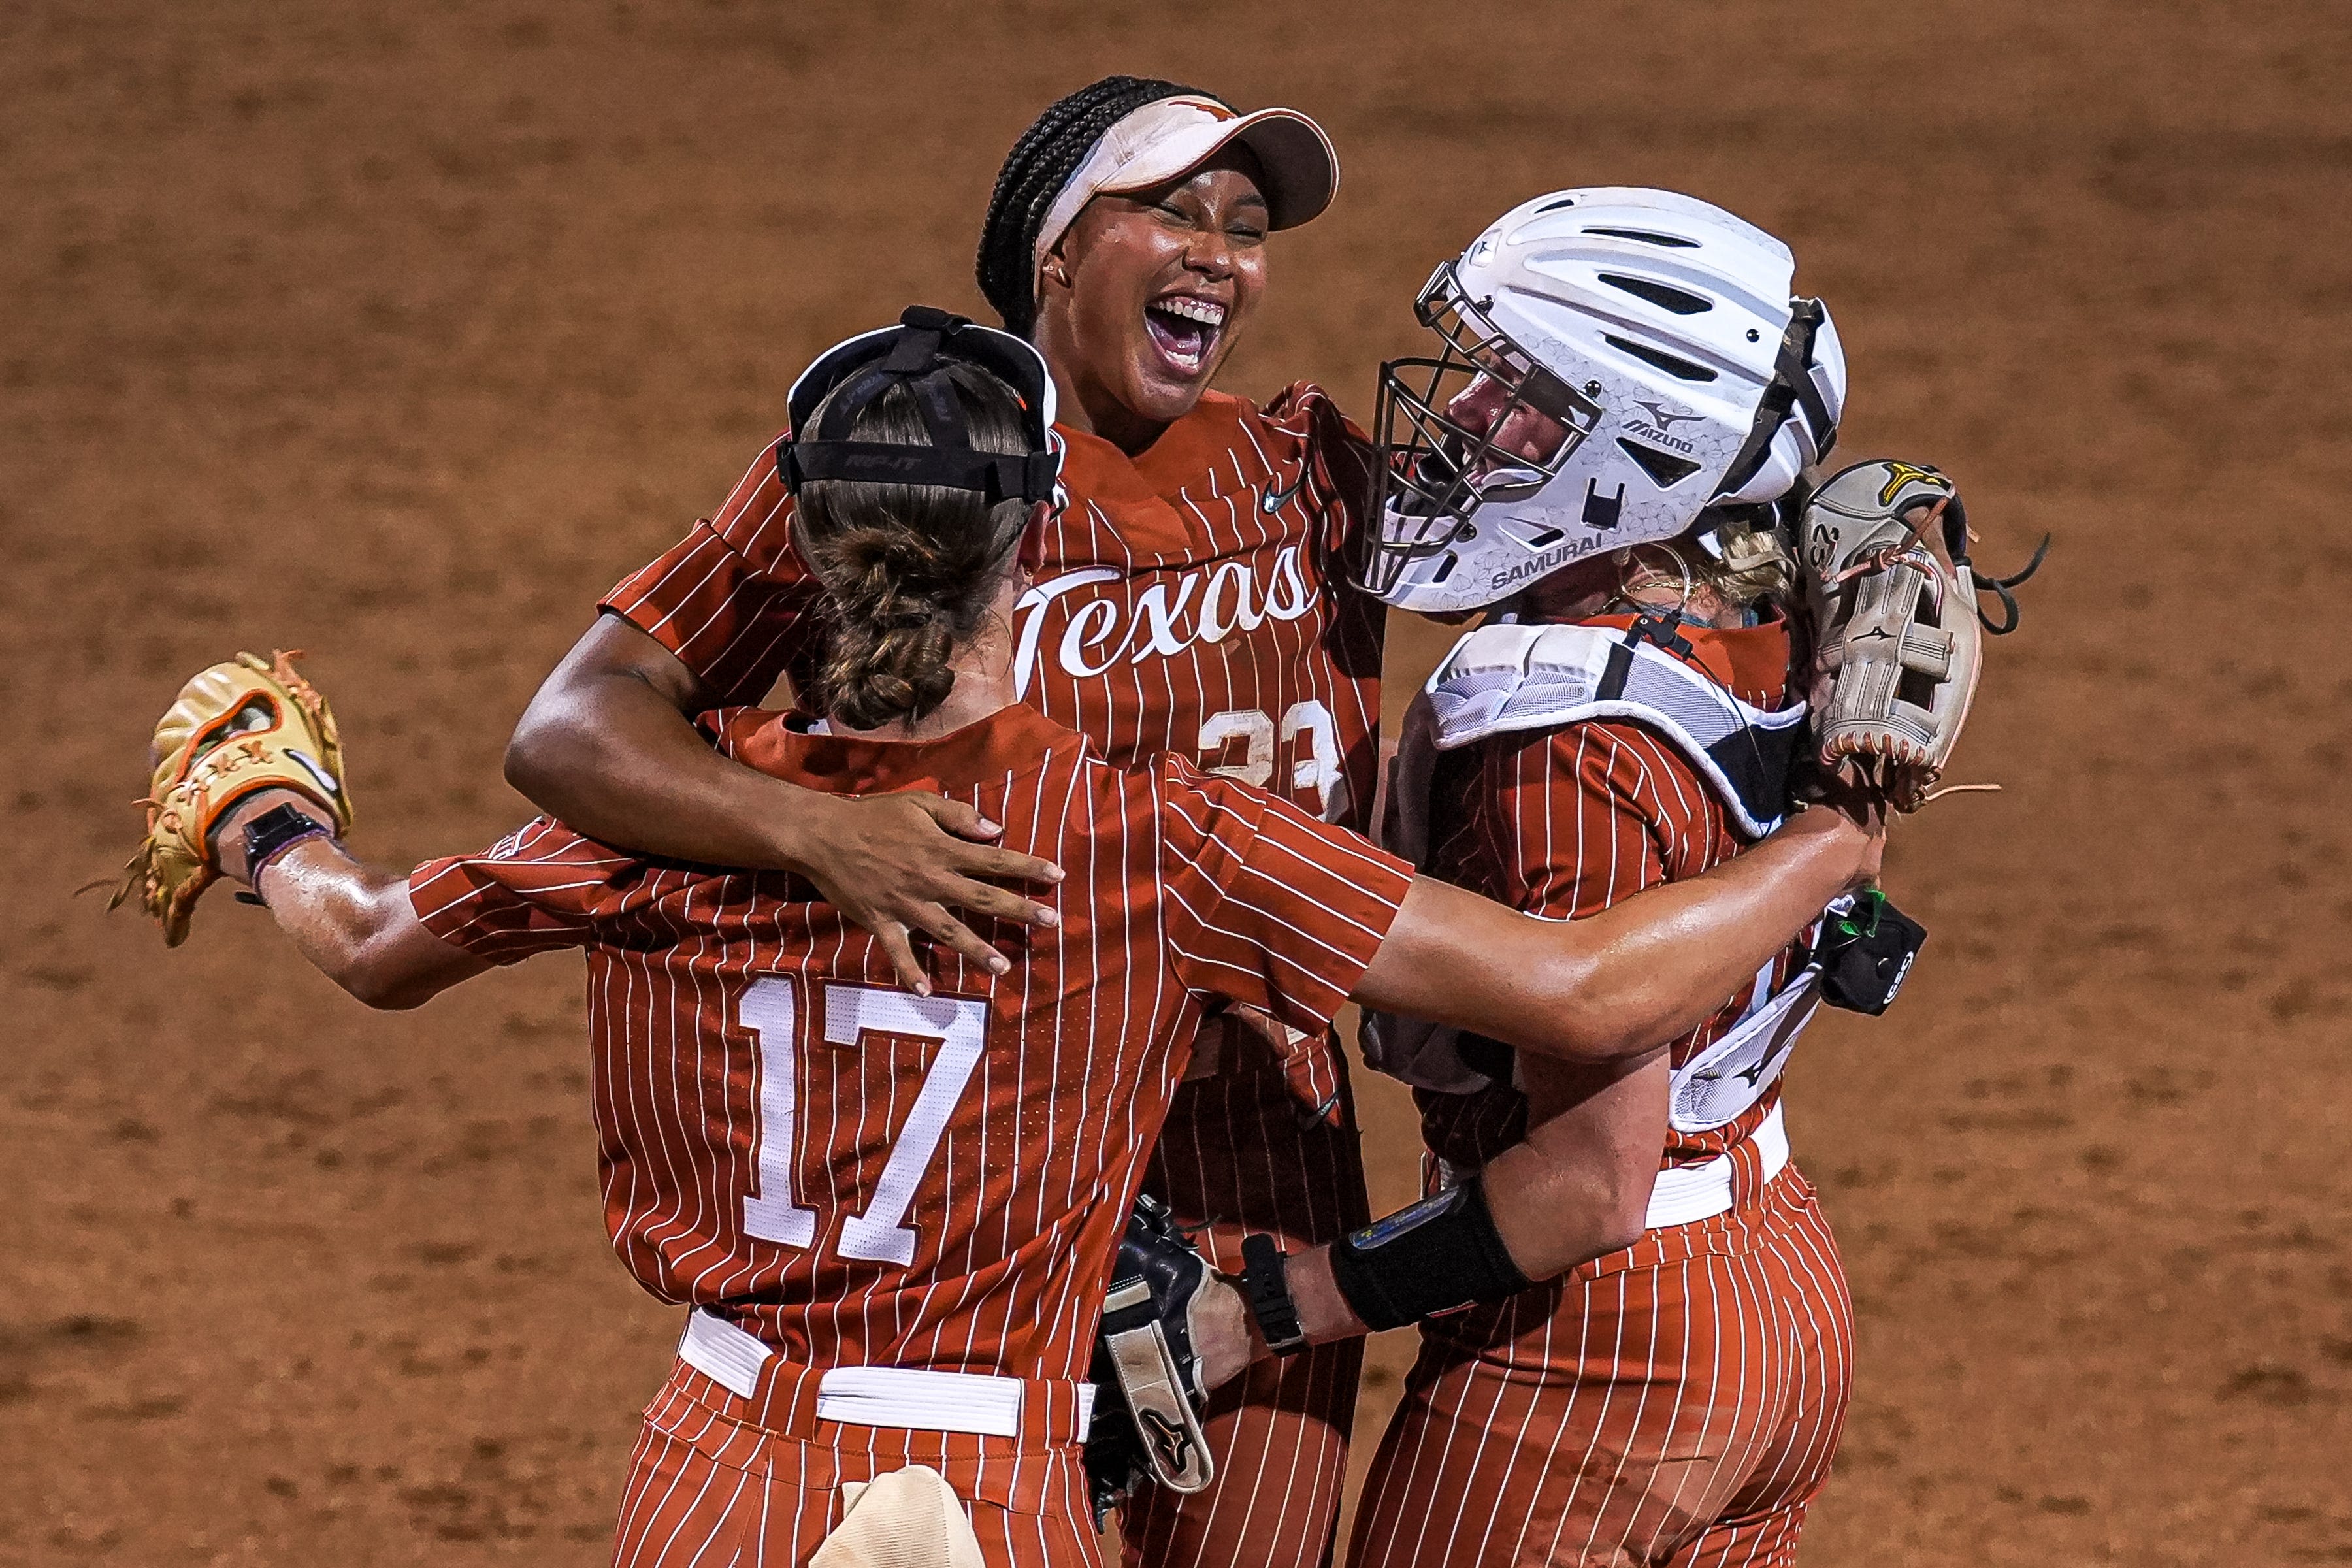 Texas shortstop Viviana Martinez played for USA Softball, and it helped journey to WCWS